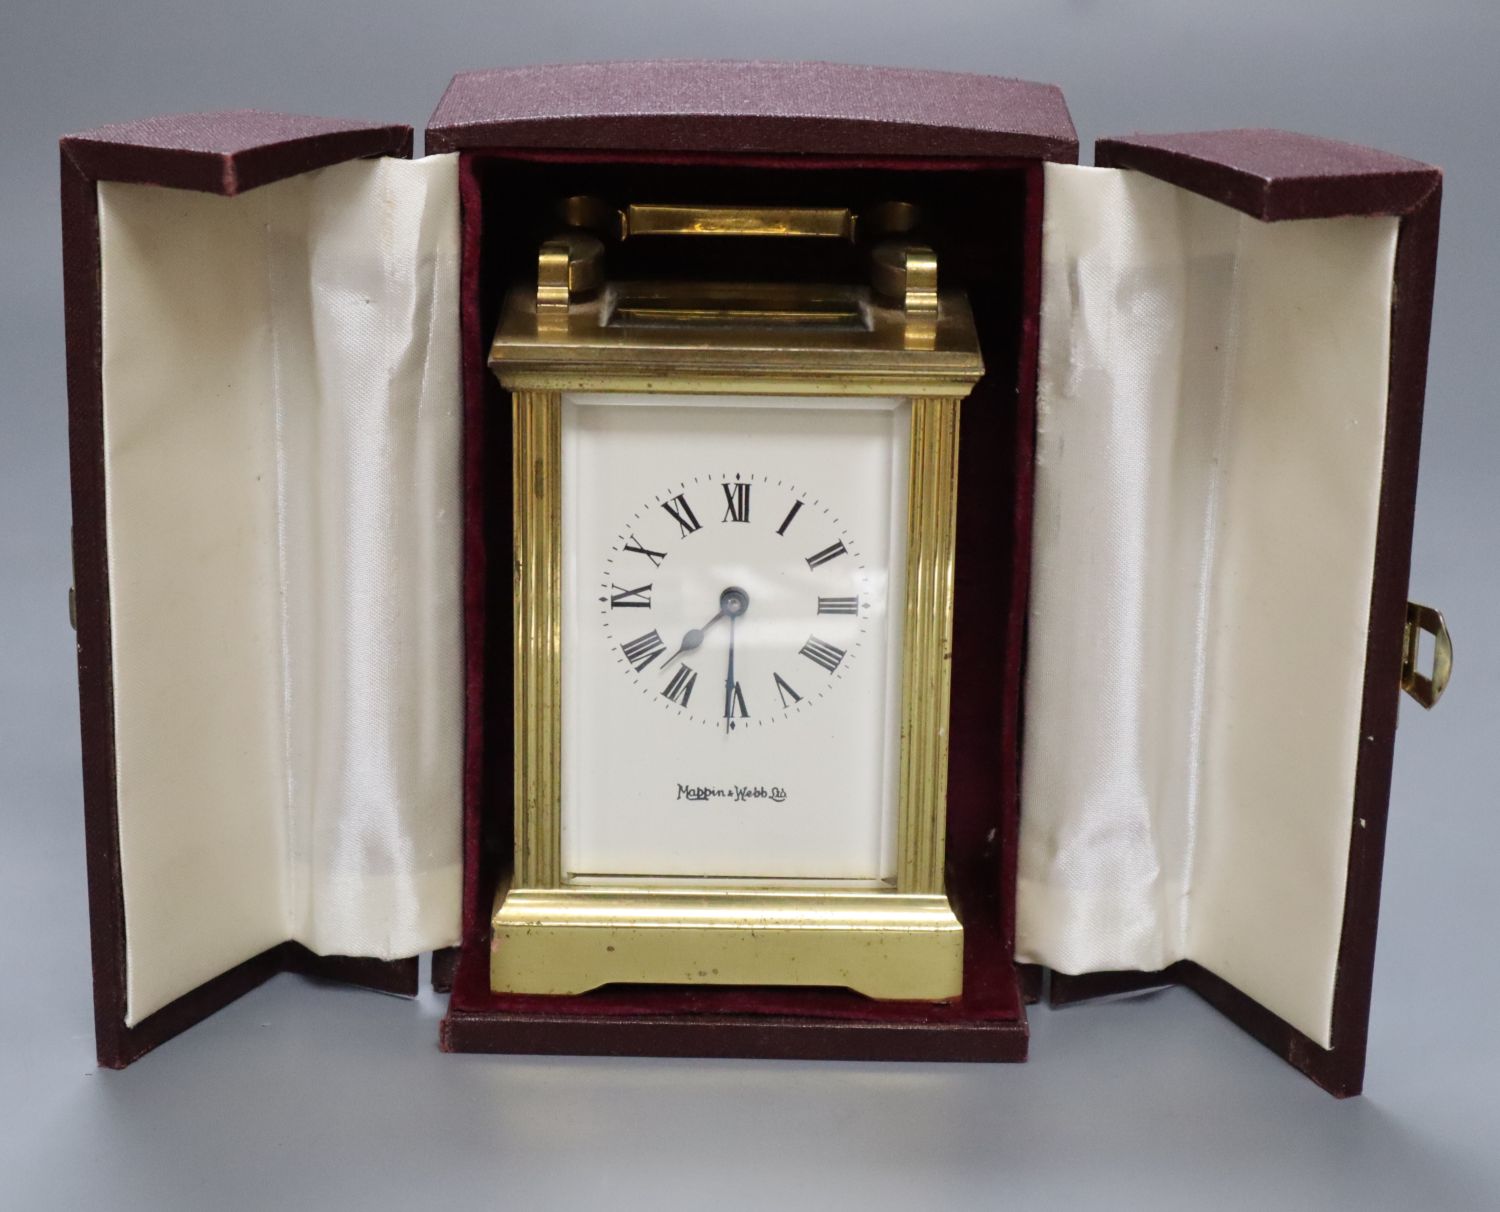 A Mappin & Webb carriage timepiece, in original case